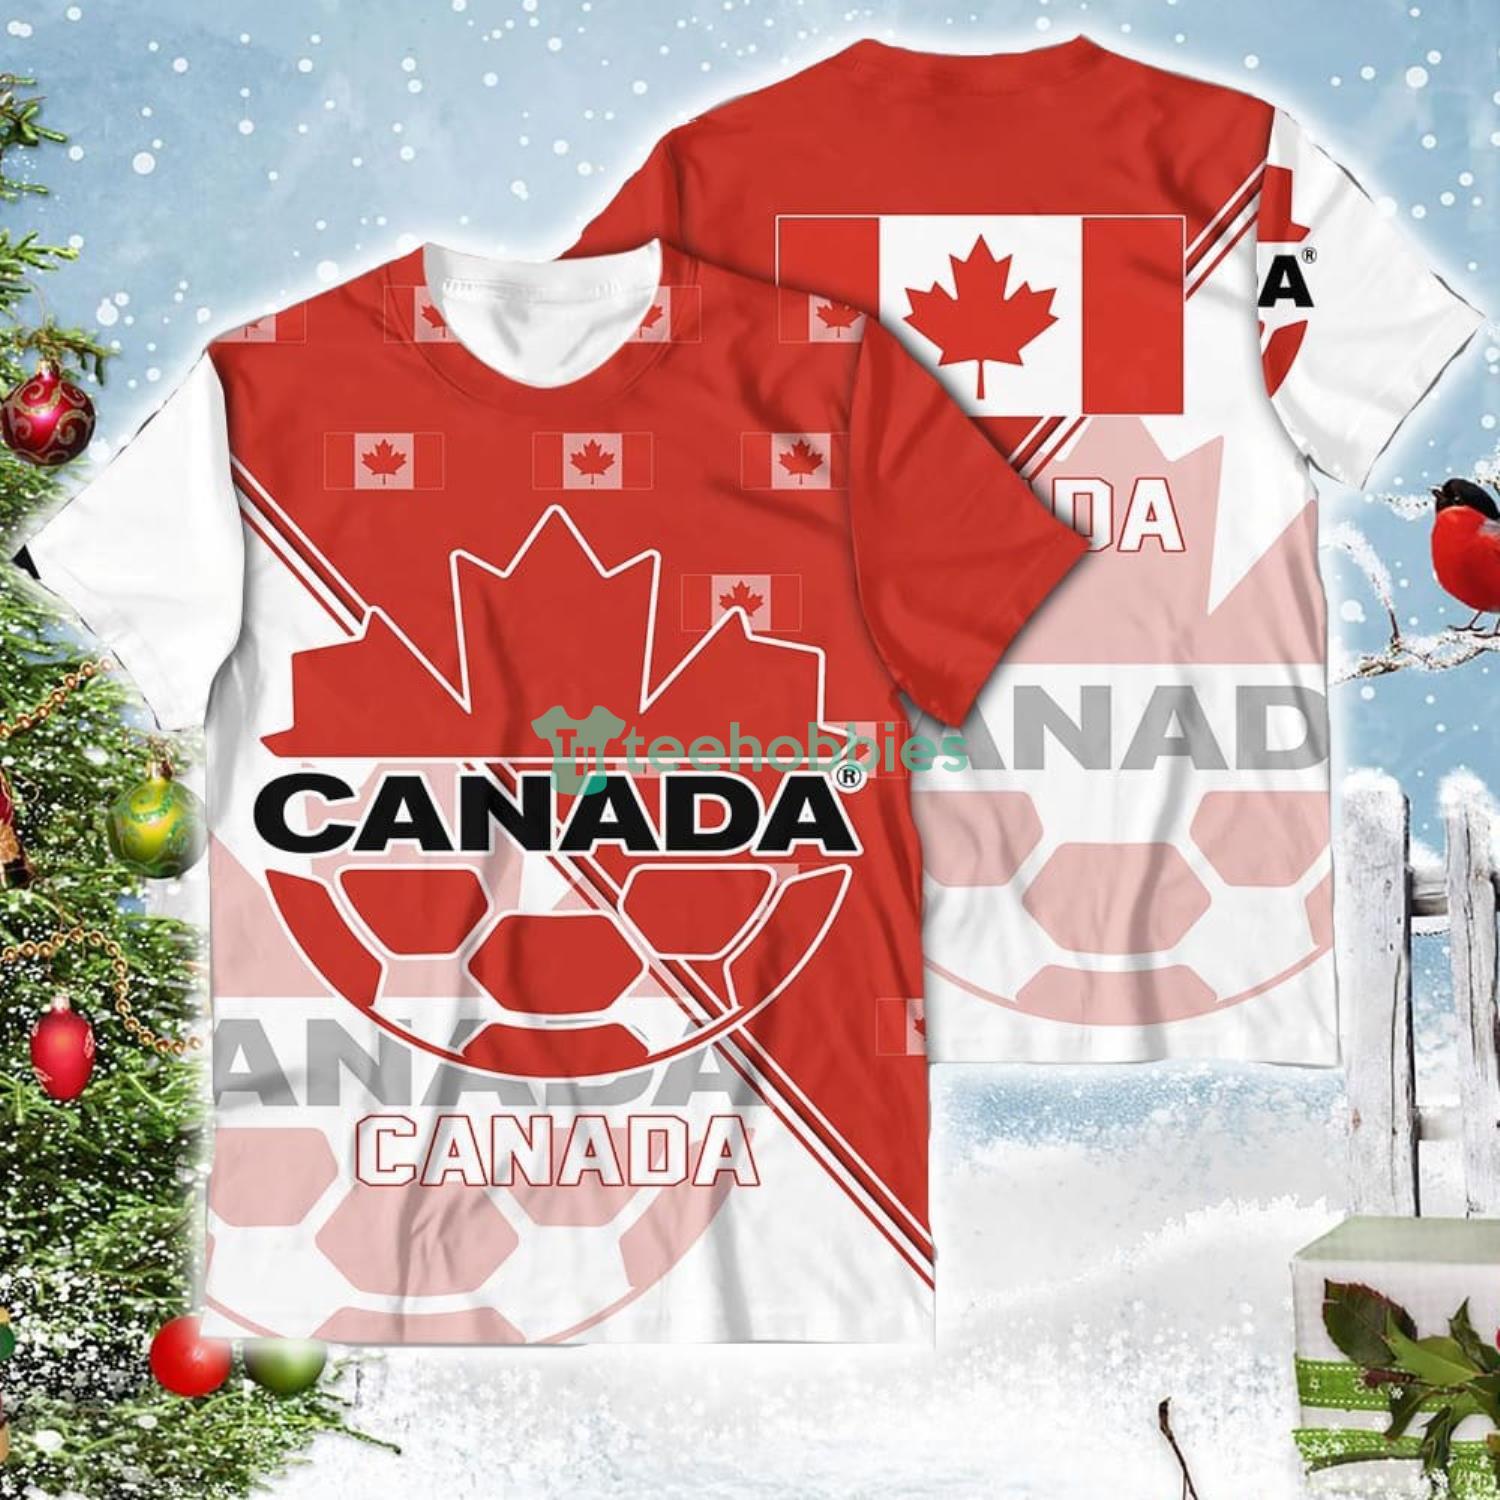 Canada National Soccer Team Qatar World Cup 2022 Champions Soccer Team 3D All Over Printed Shirt Product Photo 2